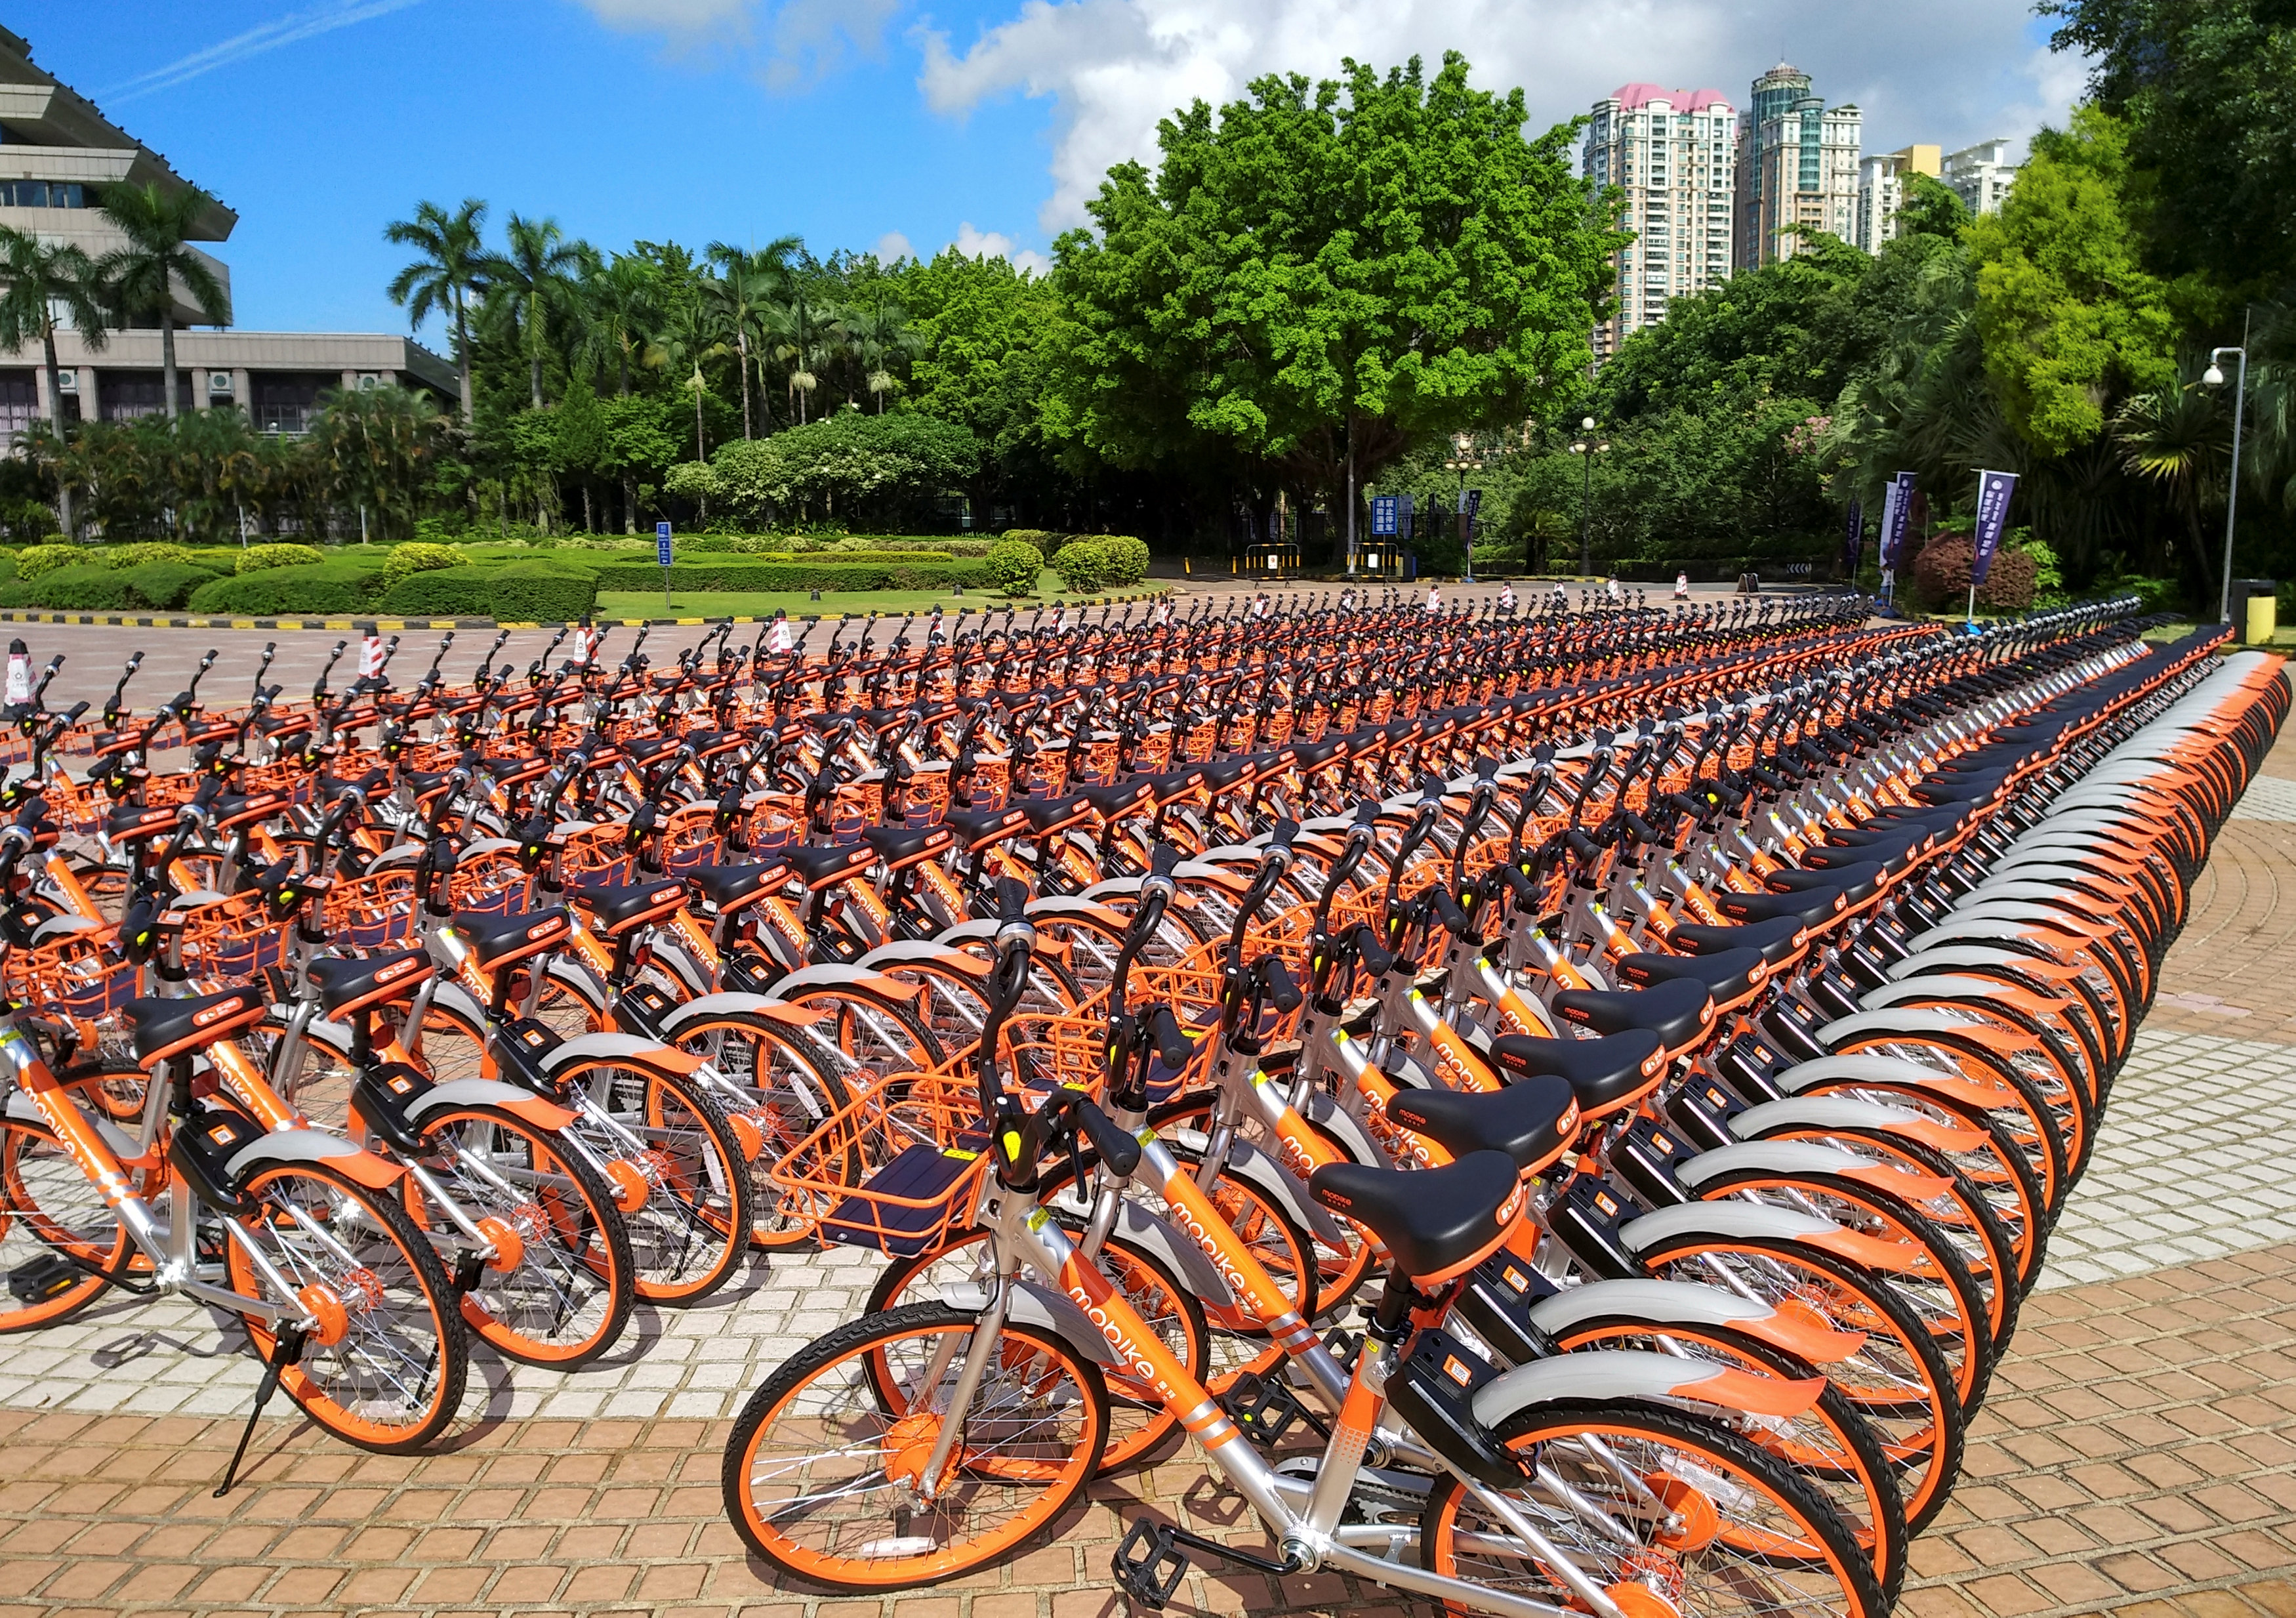 Mobike's shared bikes are lined up in Shenzhen